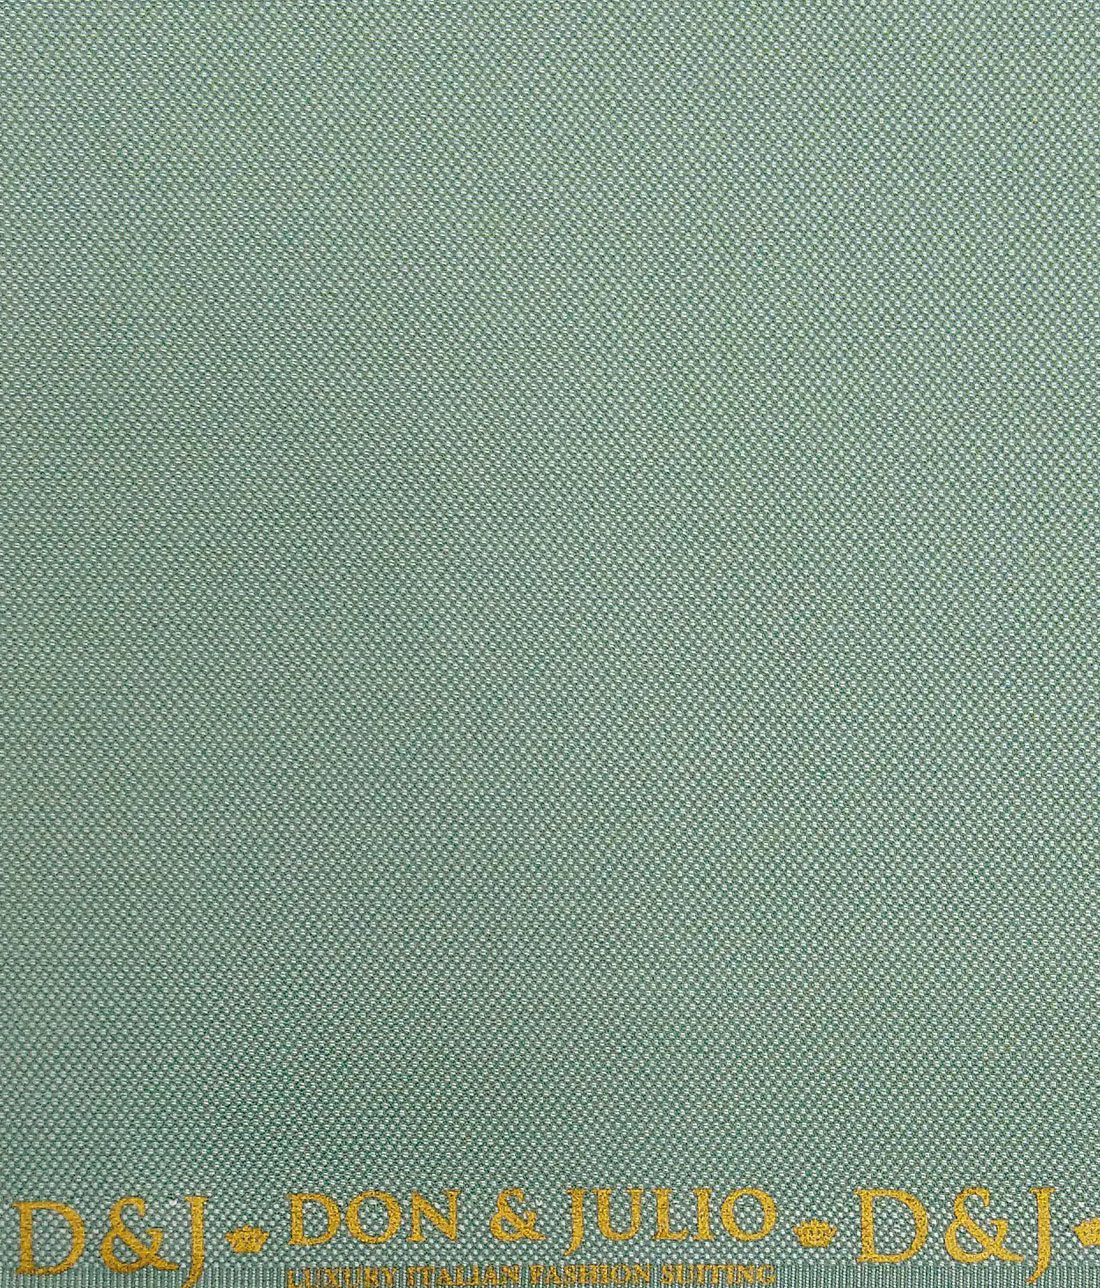 Don & Julio Mint Green Dotted Structure Unstitched Terry Rayon Suiting Fabric